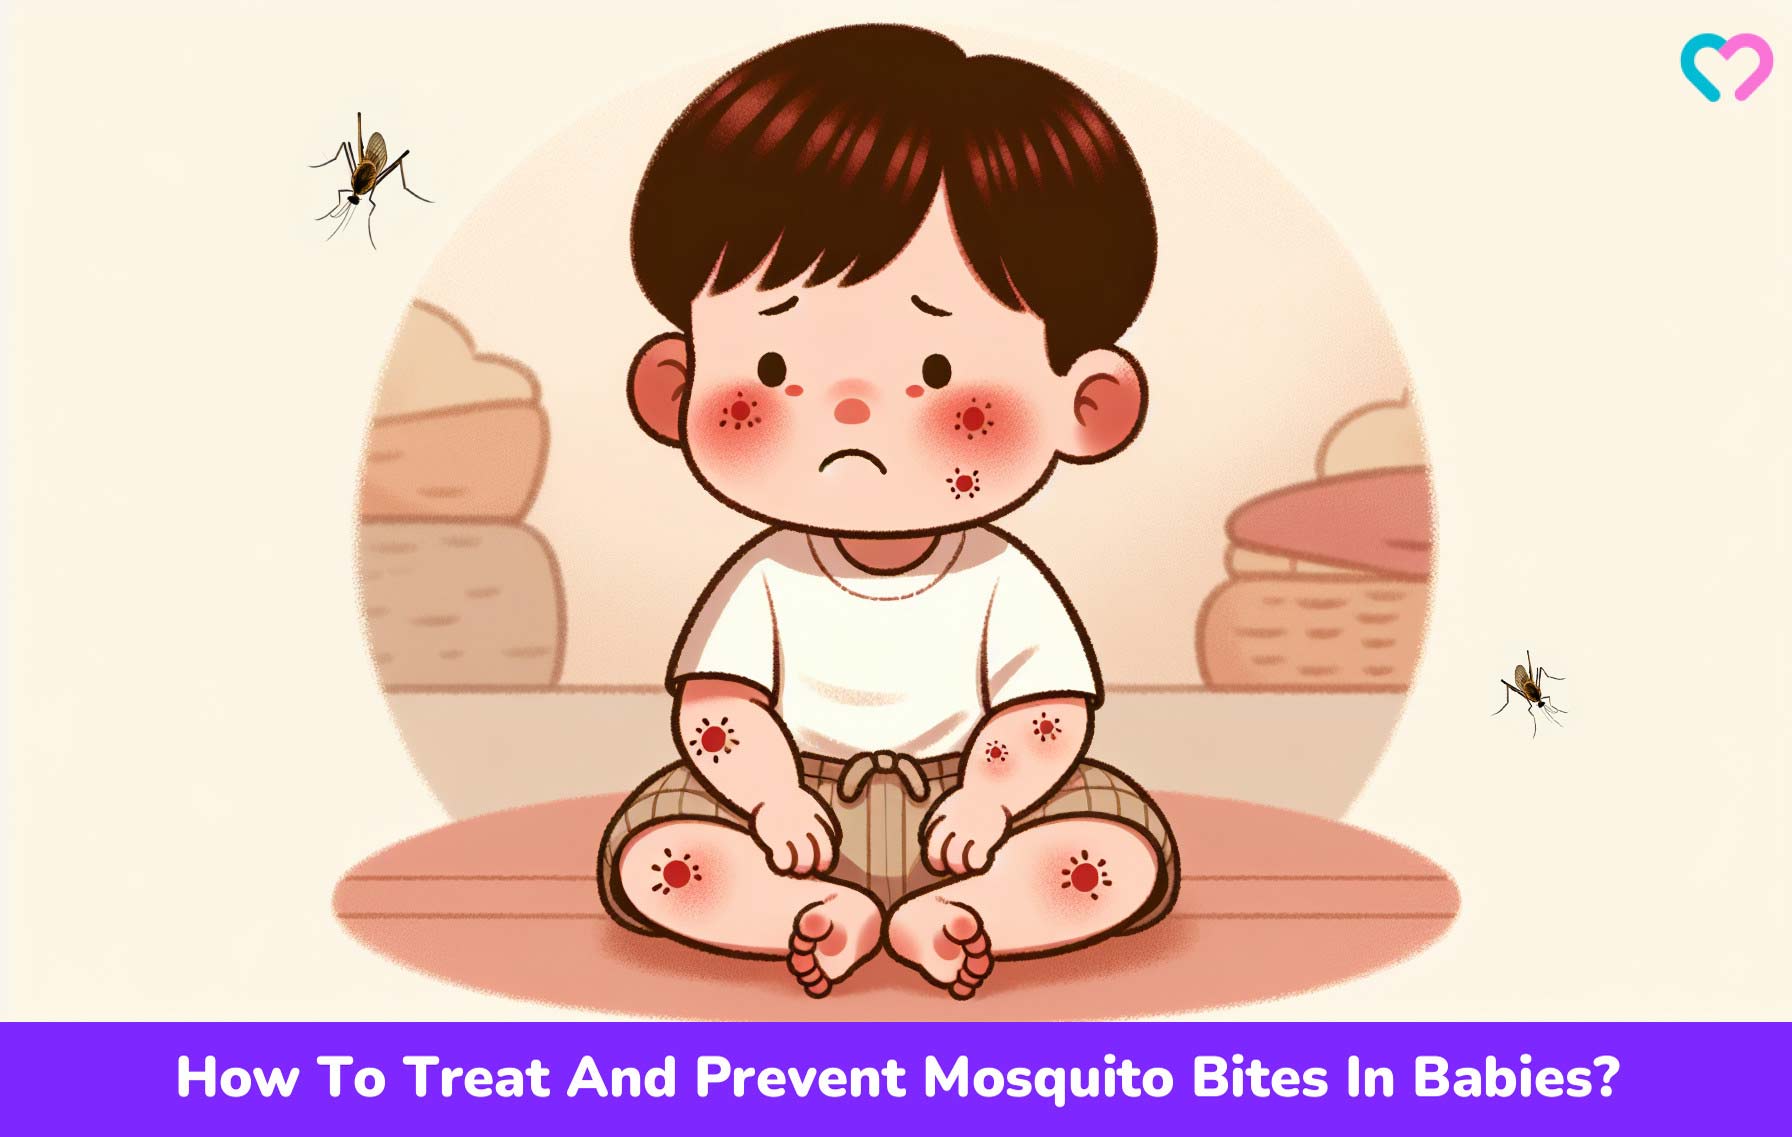 How To Treat And Prevent Mosquito Bites In Babies?_illustration